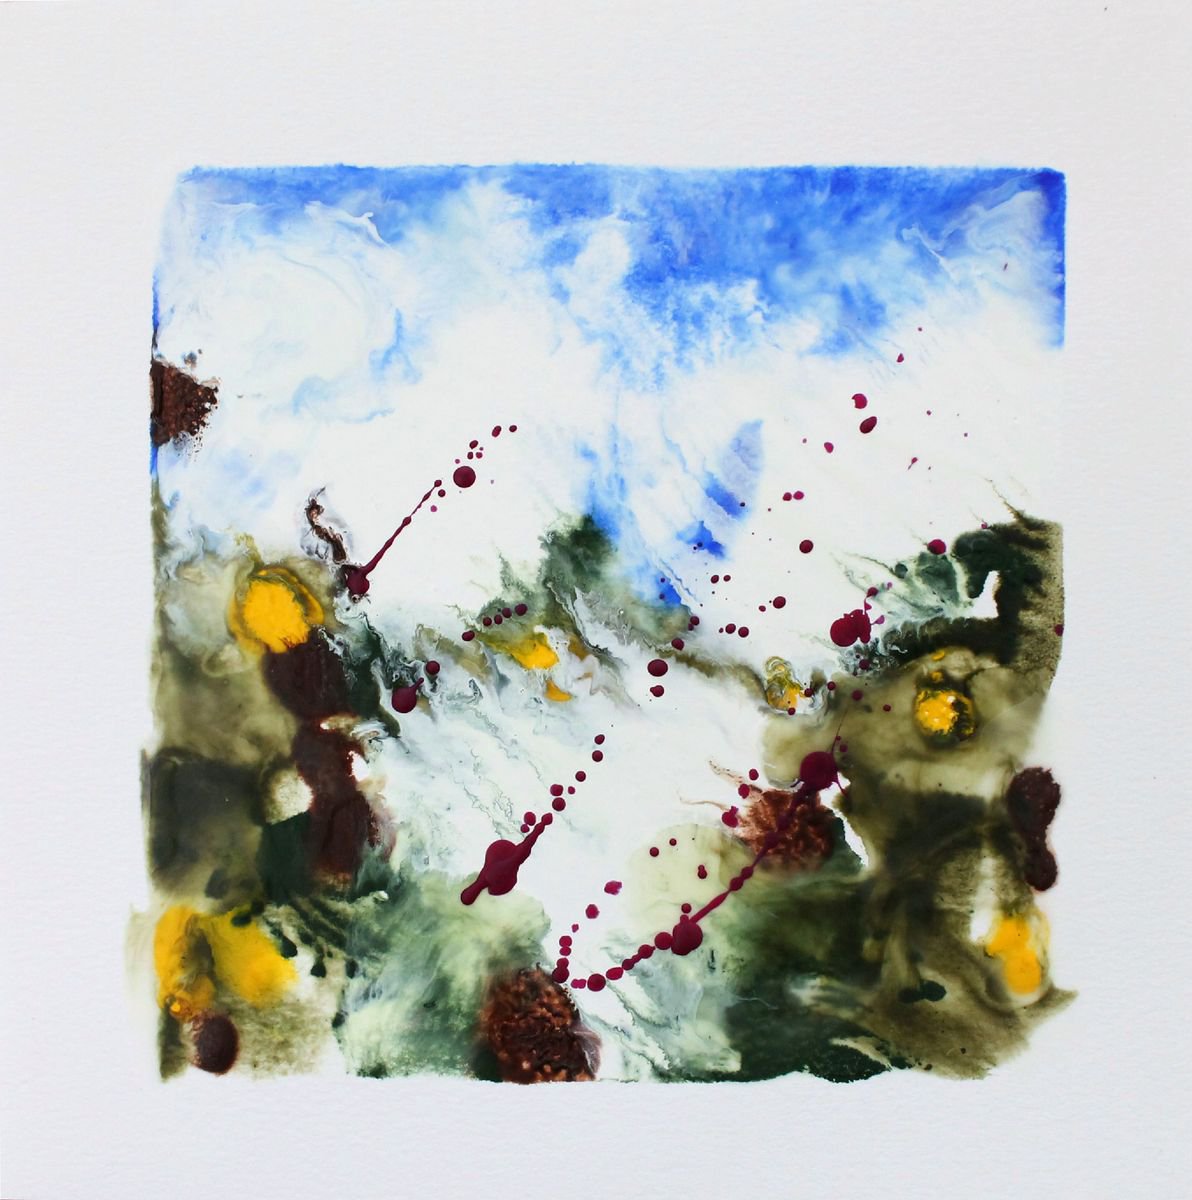 Windy Hill - Encaustic Painting by Tammy Silbermann